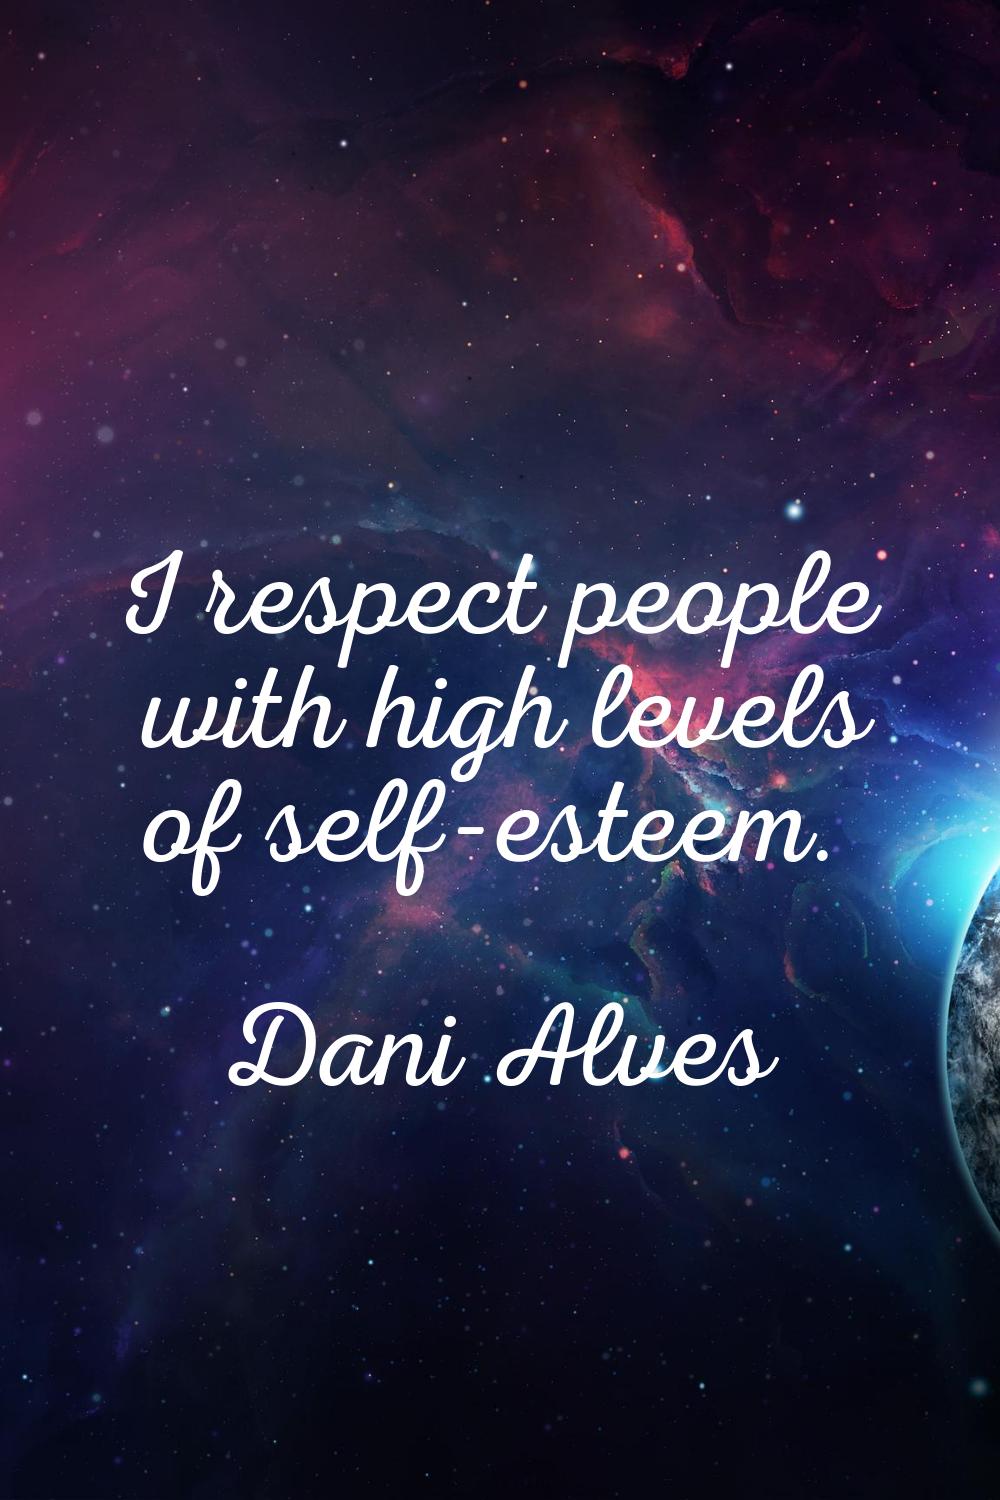 I respect people with high levels of self-esteem.